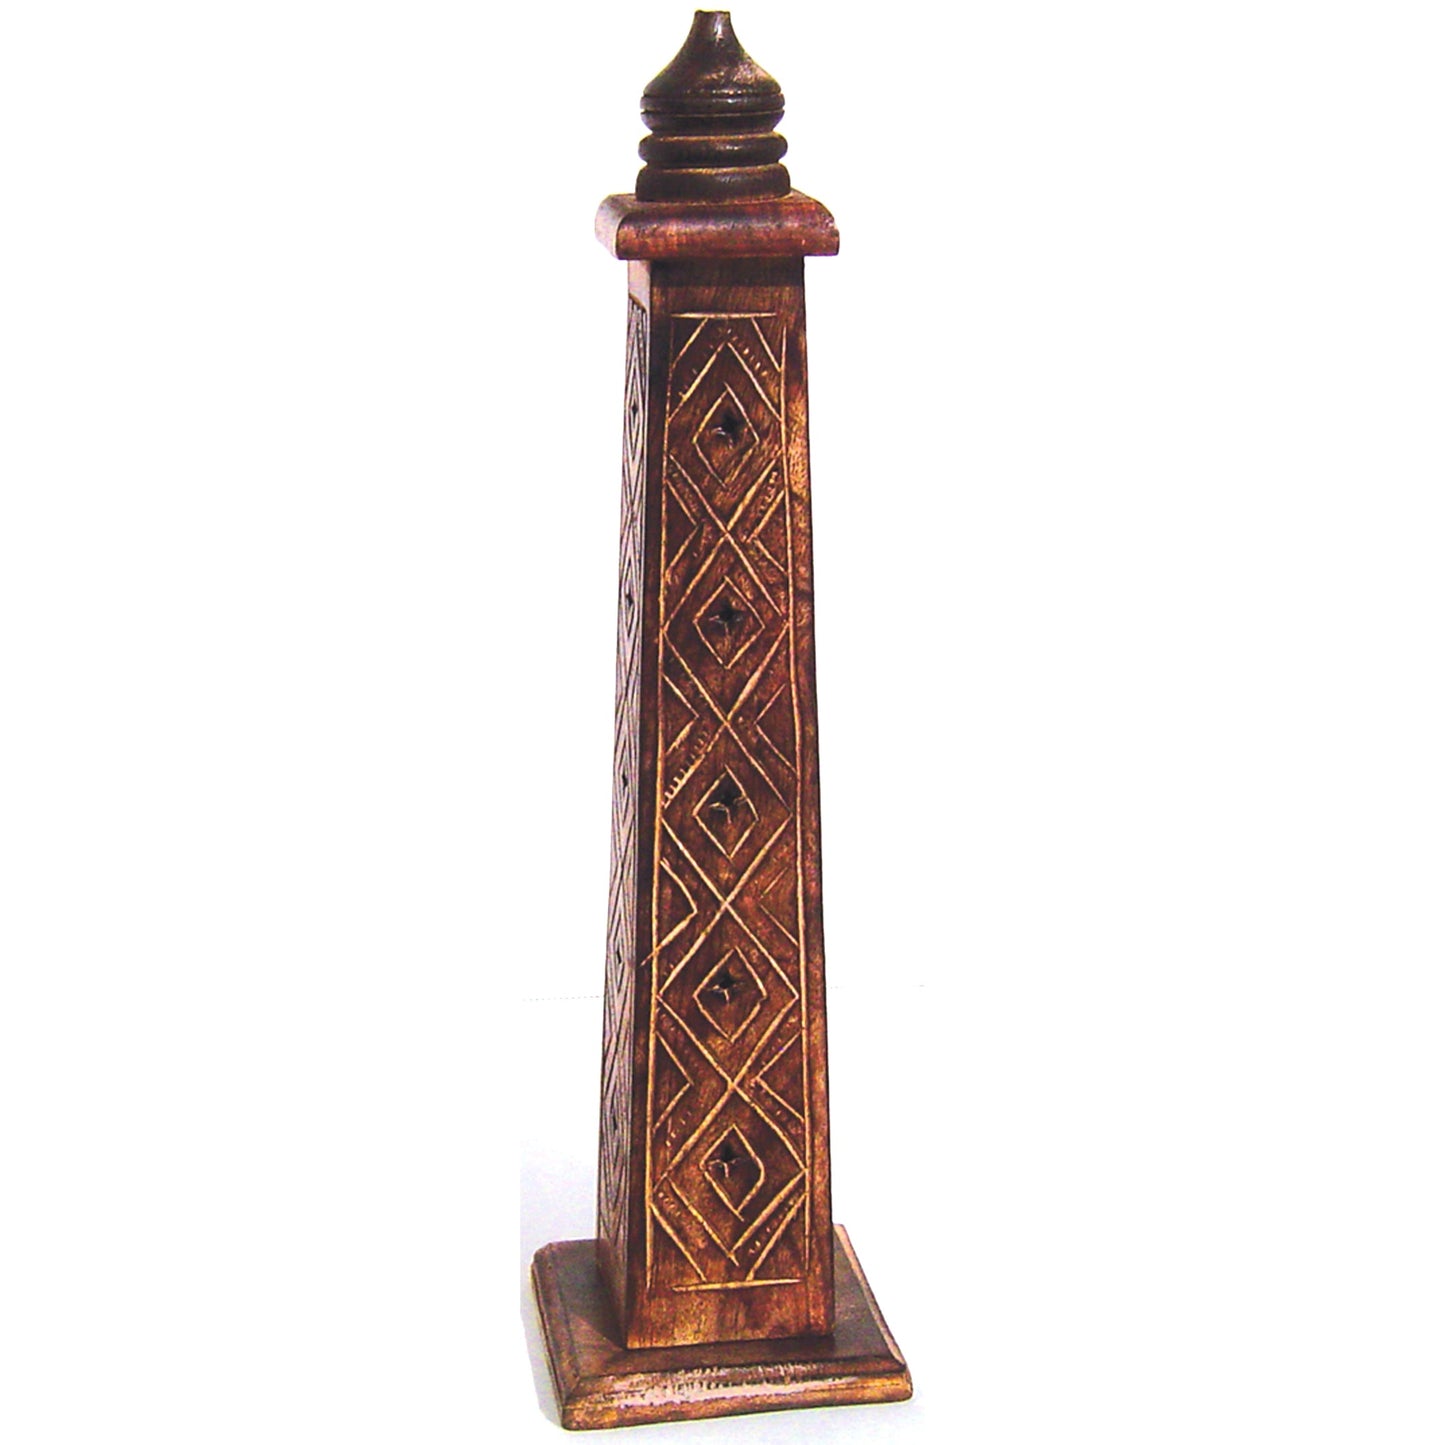 Burning Accessories - 4 Sided Mangowood 12" Tower